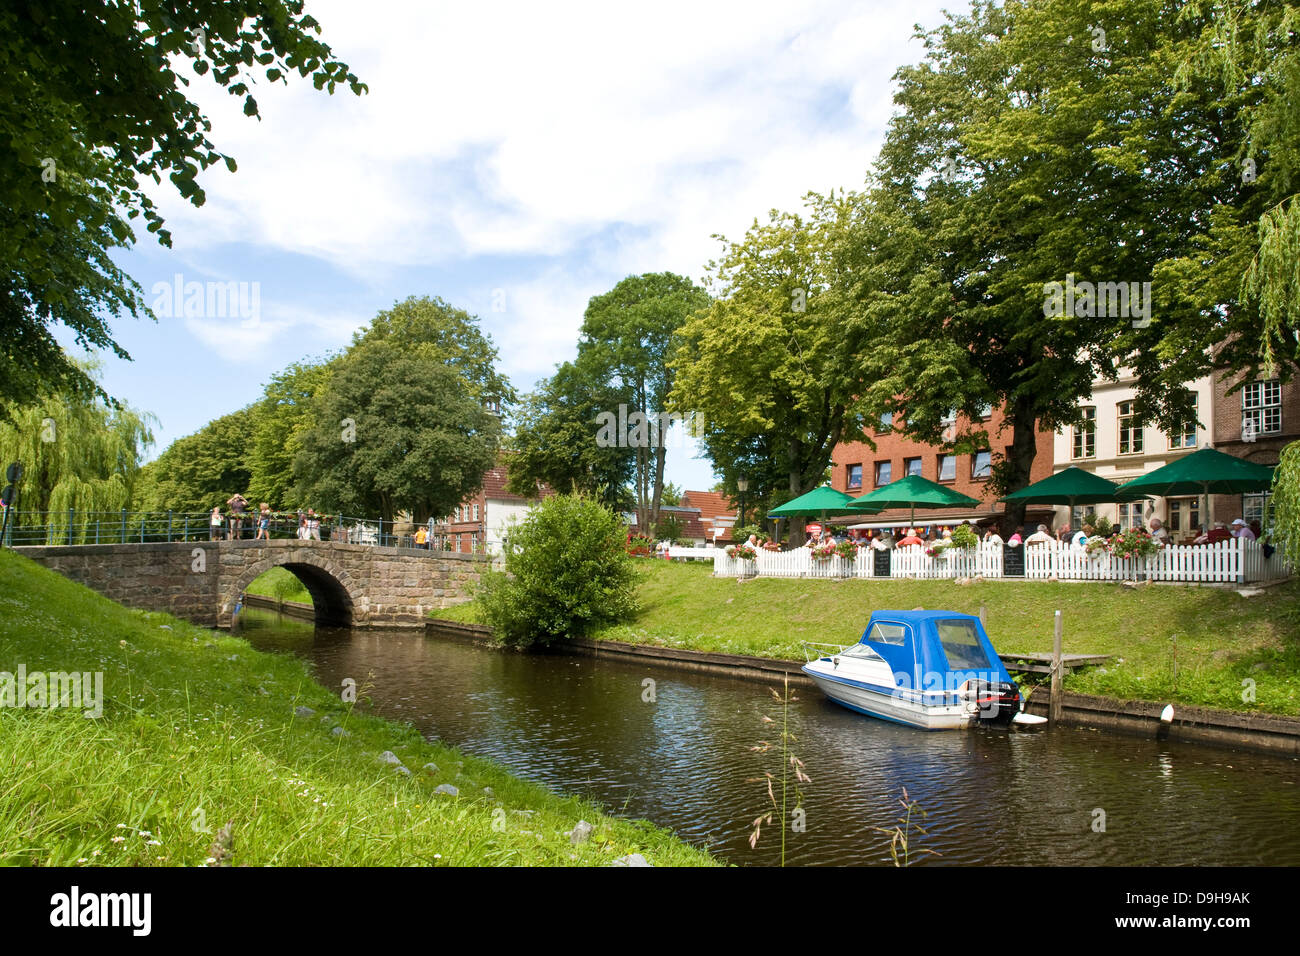 Idyllic situation in a canal in Friedrich's town, Idyllic location on a canal in Friedrich's town, Stock Photo